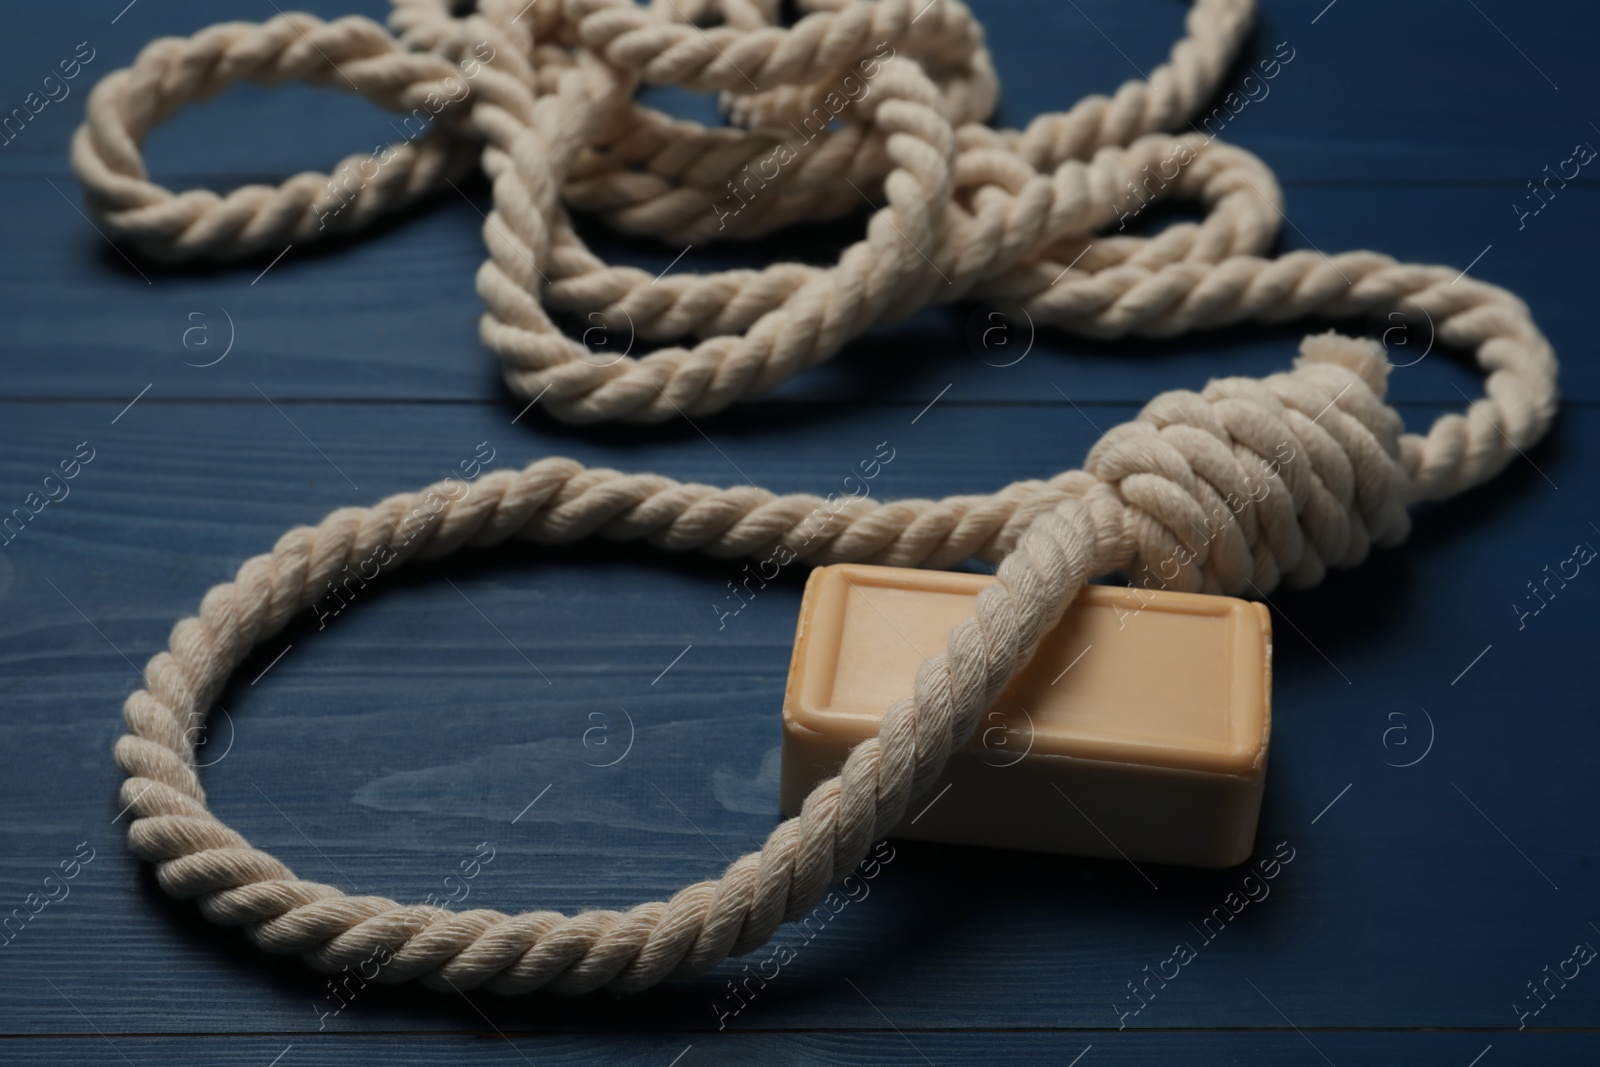 Photo of Rope noose and soap bar on blue wooden table, closeup